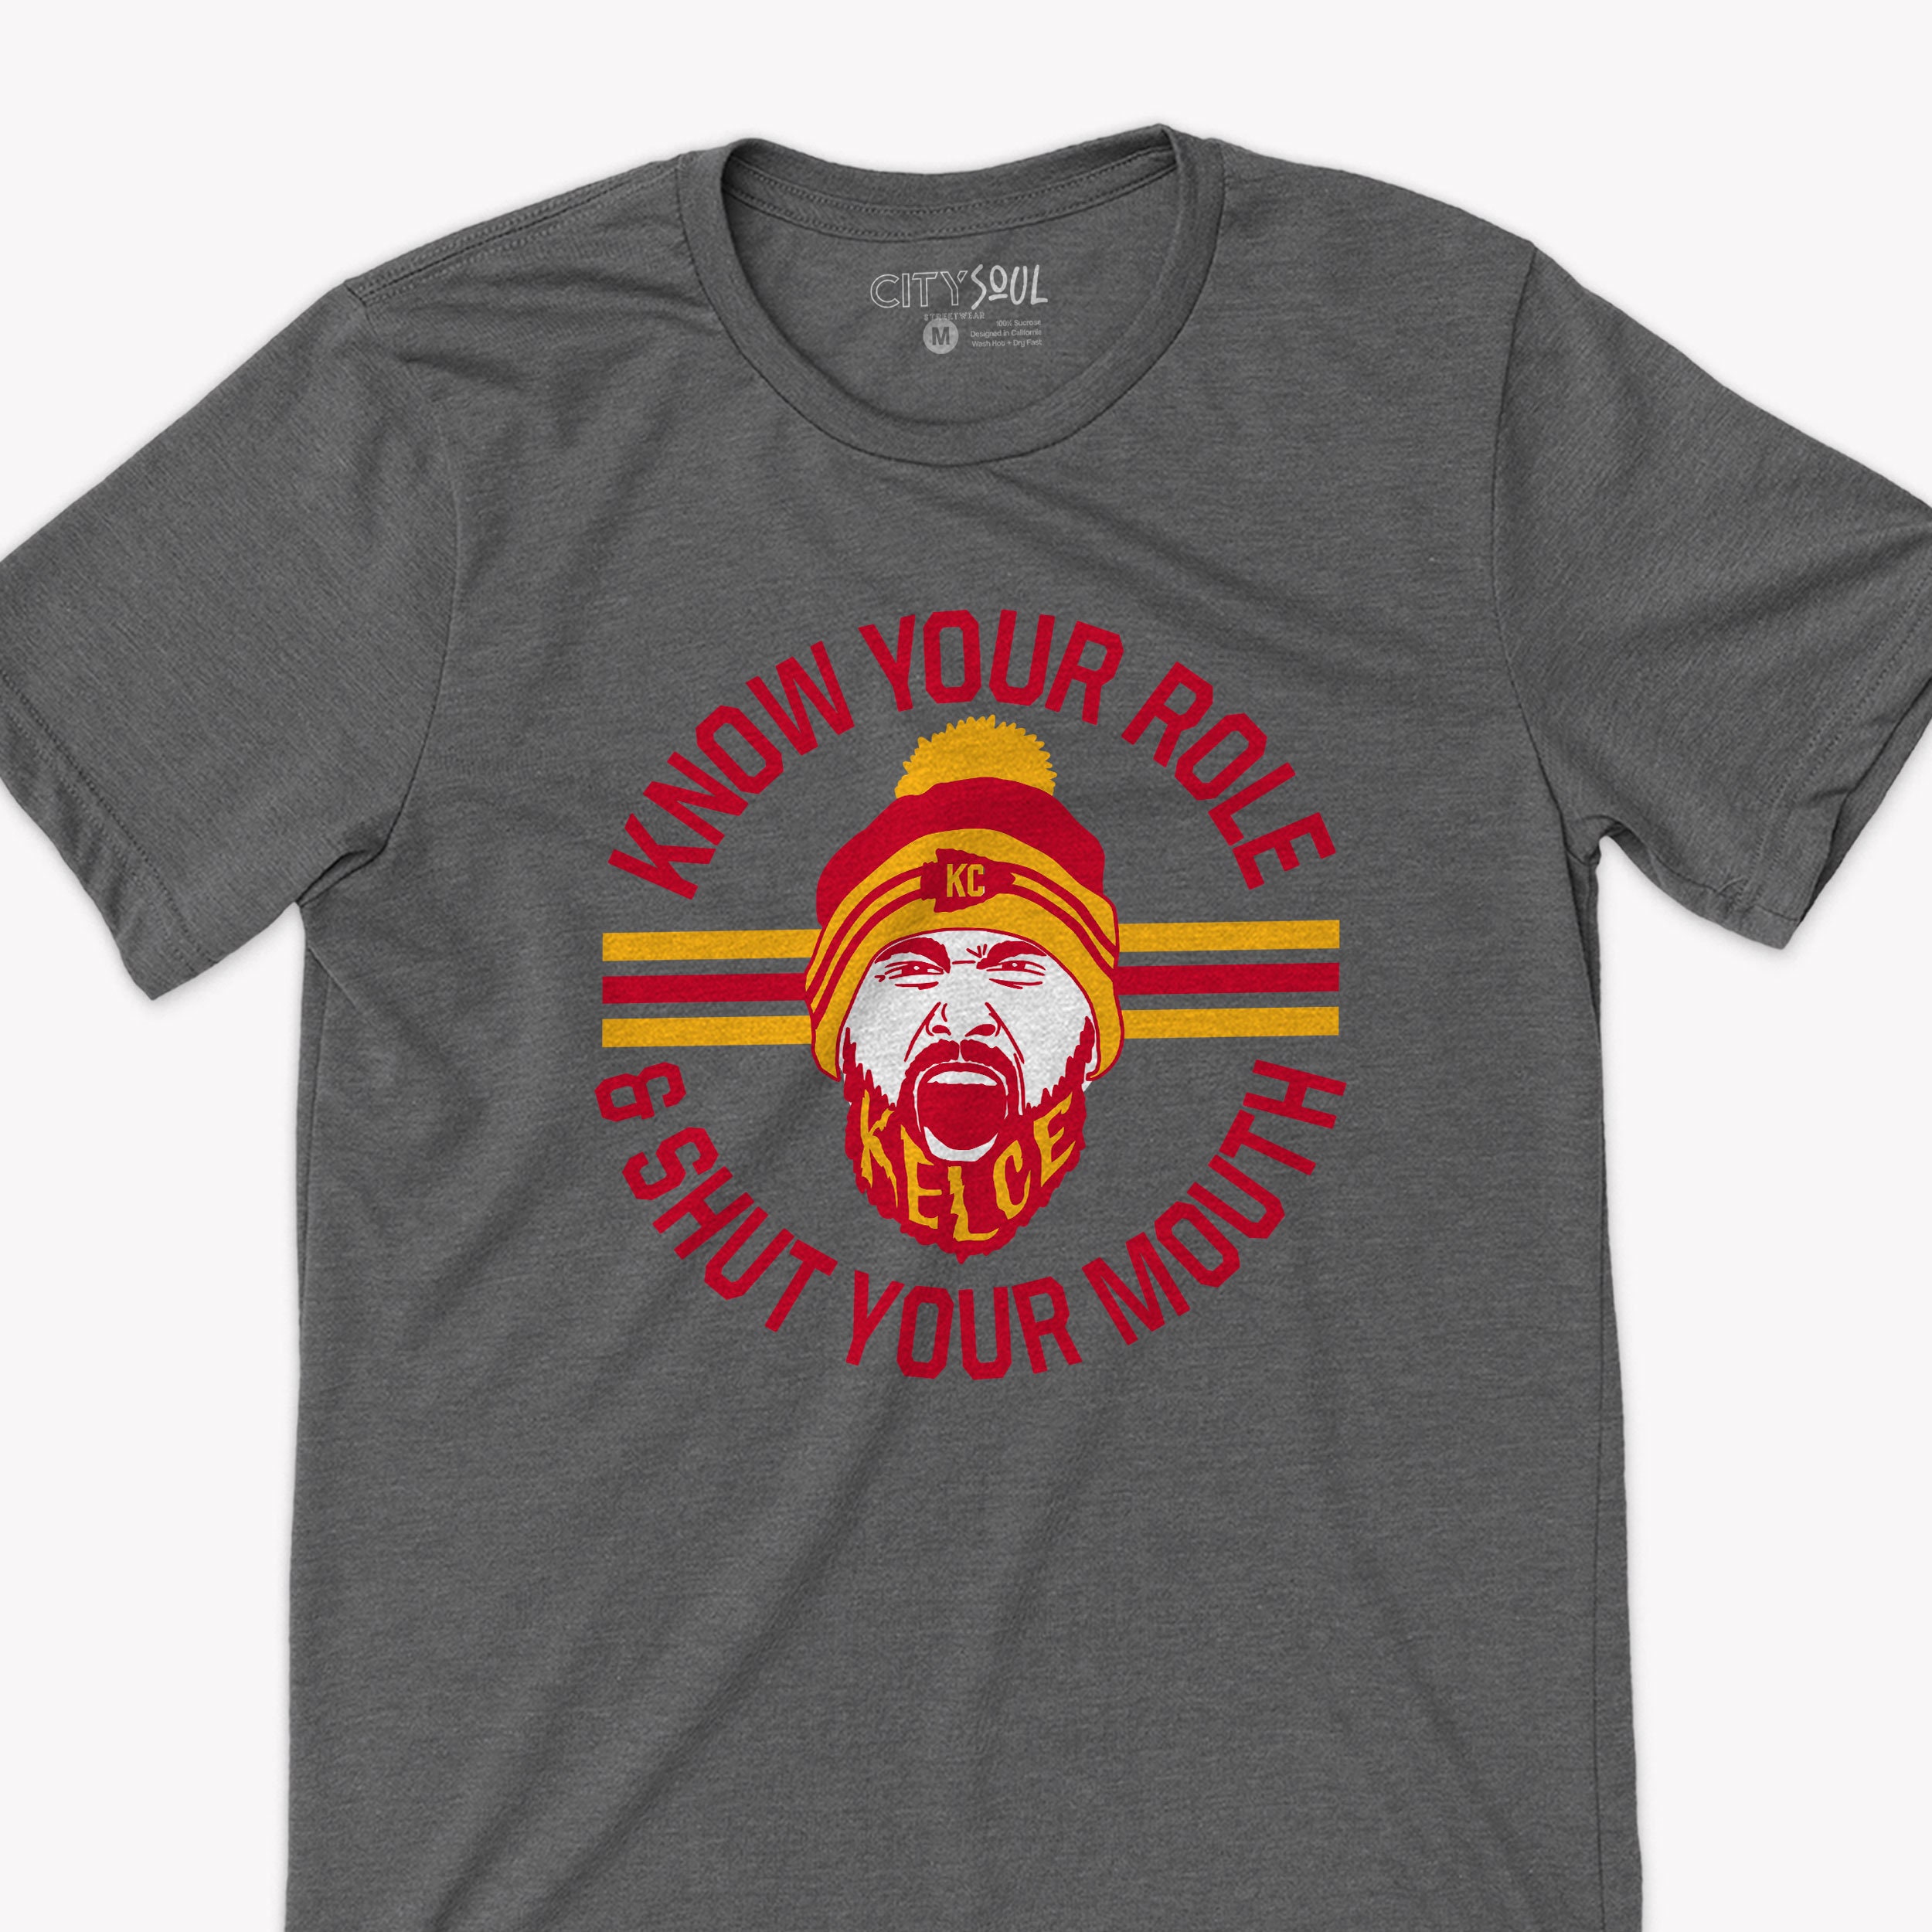 Discover funny kc football know your role and shut your mouth kelce shirt, travis kelce kansas city football tees